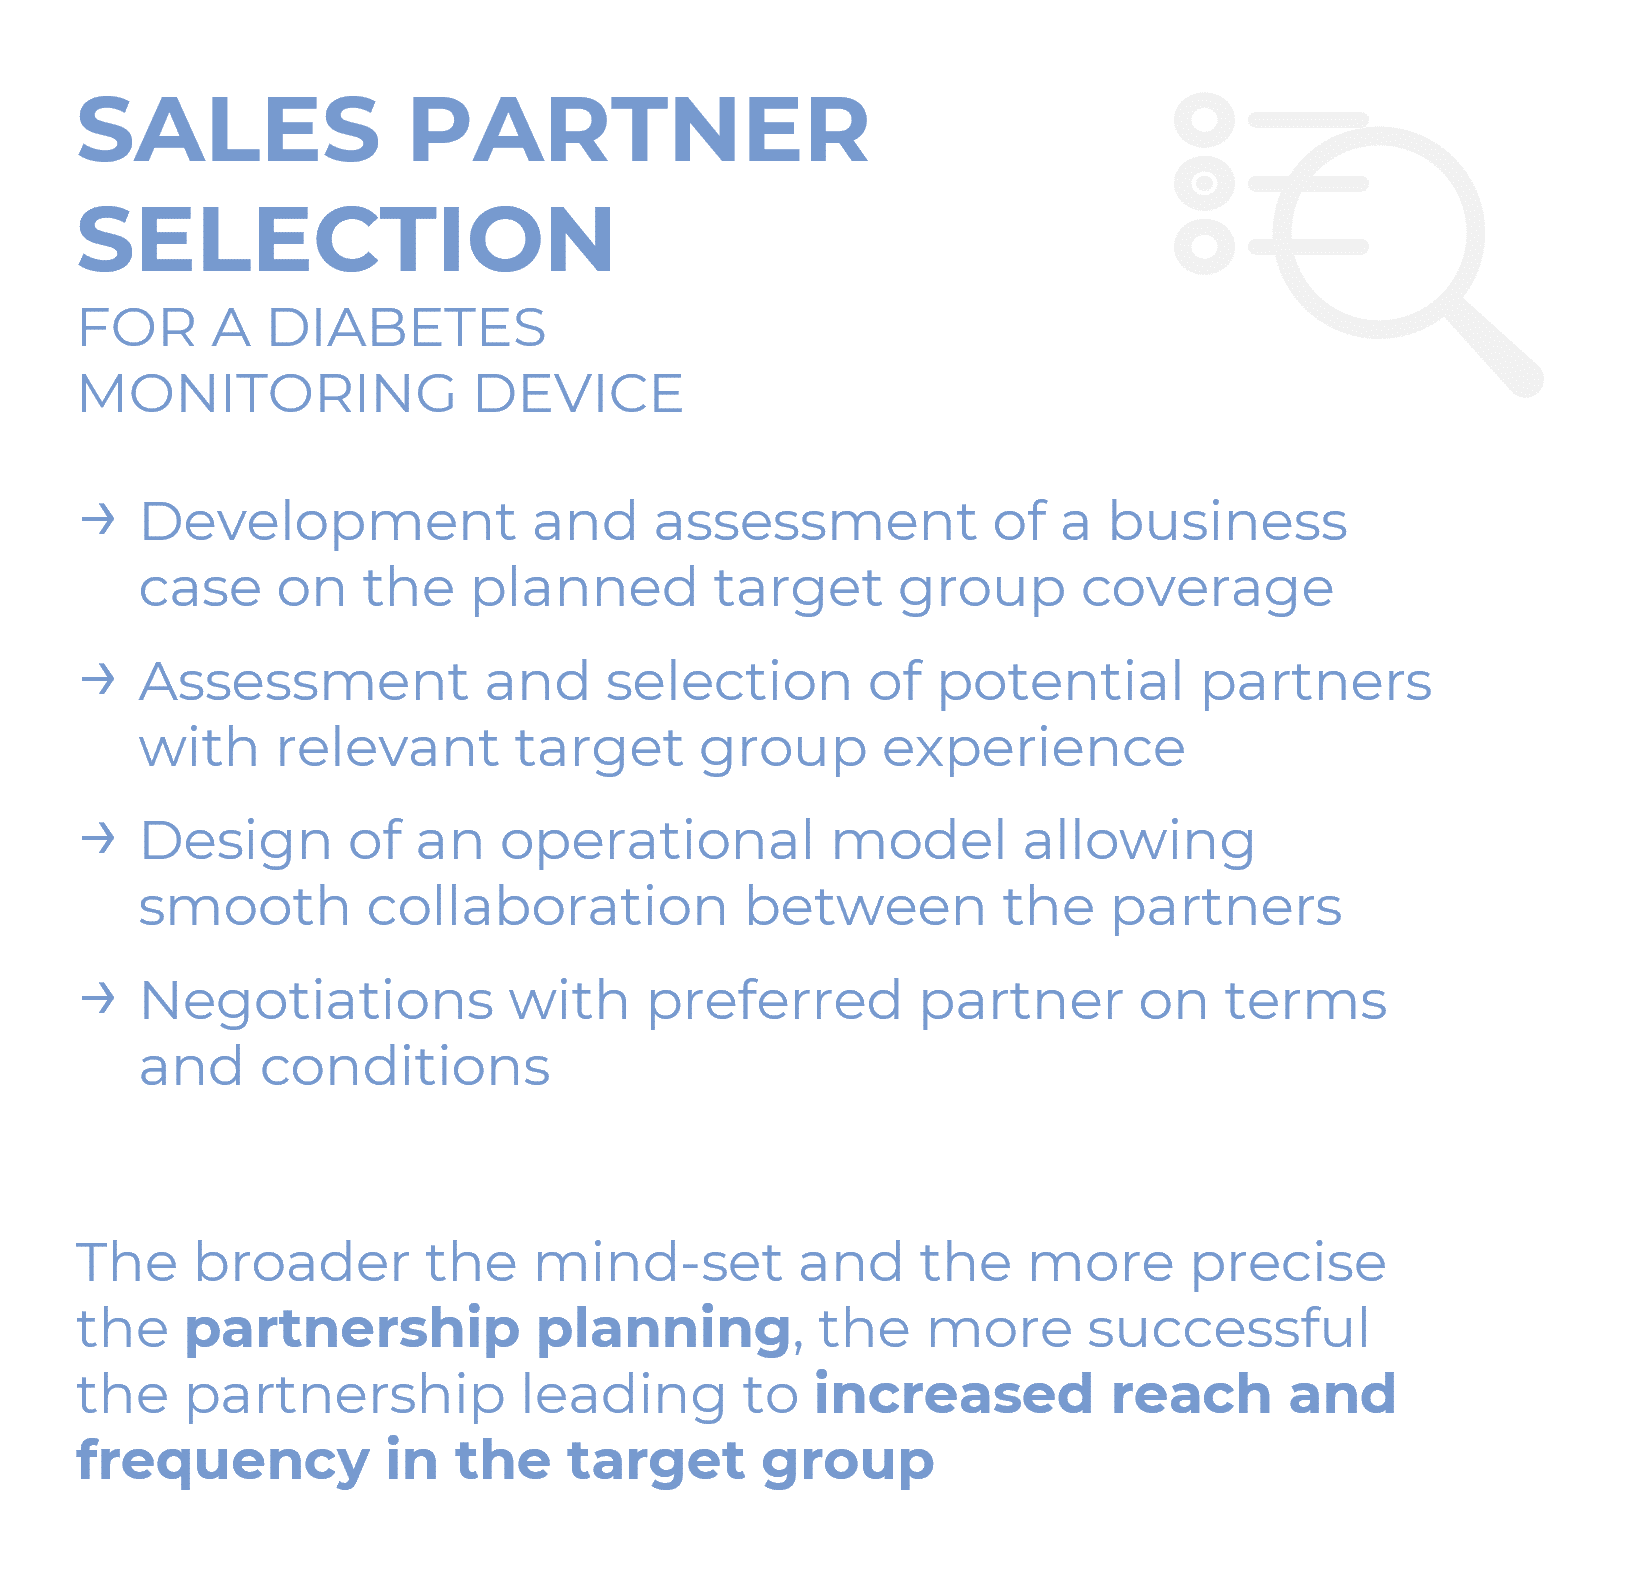 SALES PARTNER SELECTION FOR A DIABETES MONITORING DEVICE